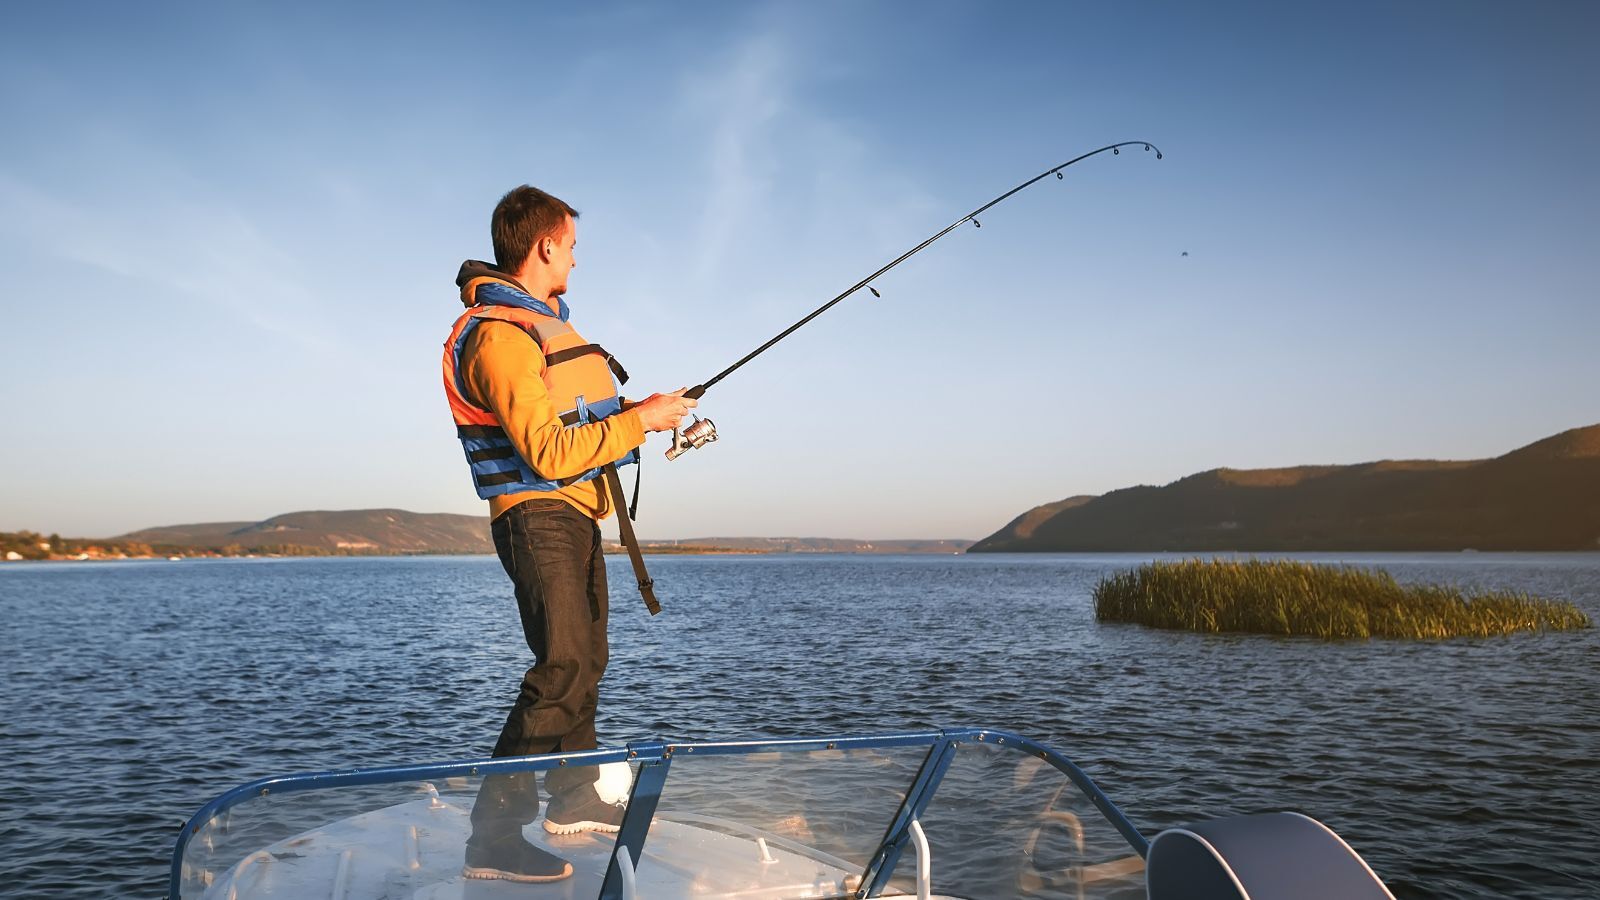 How To Hold A Fishing Rod? [Beginners Guide]